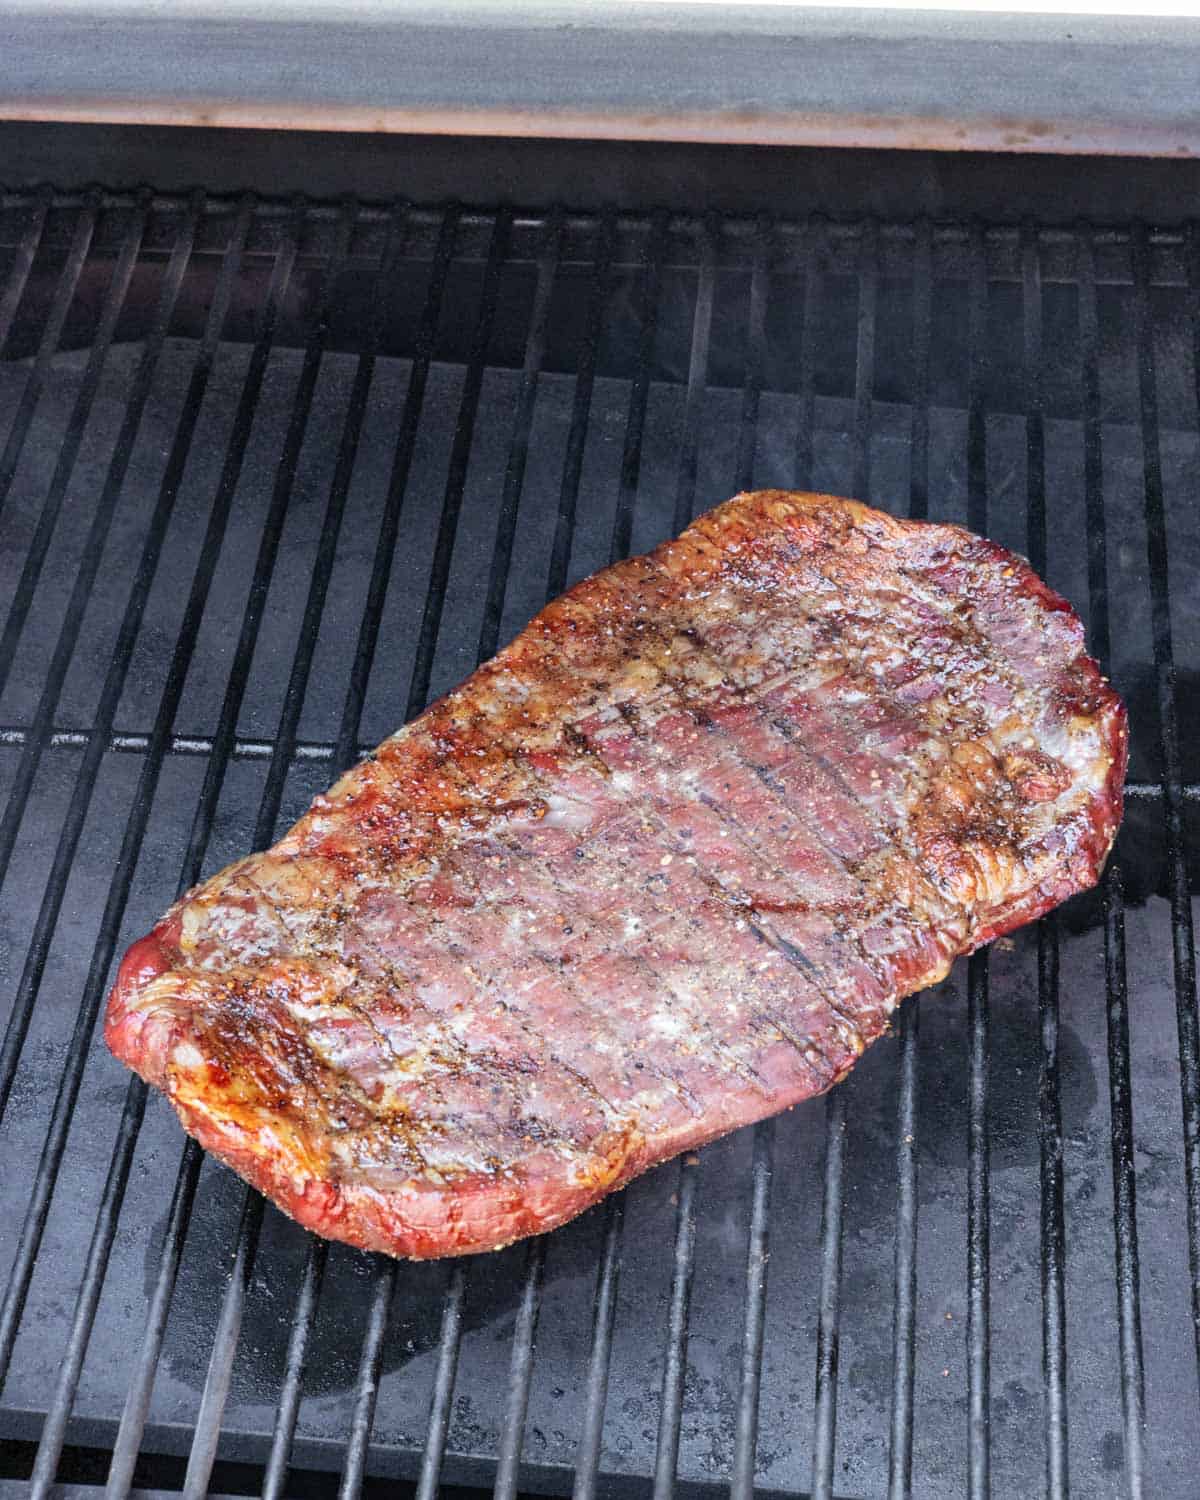 Flank steak flipped on the smoker for searing side 2.